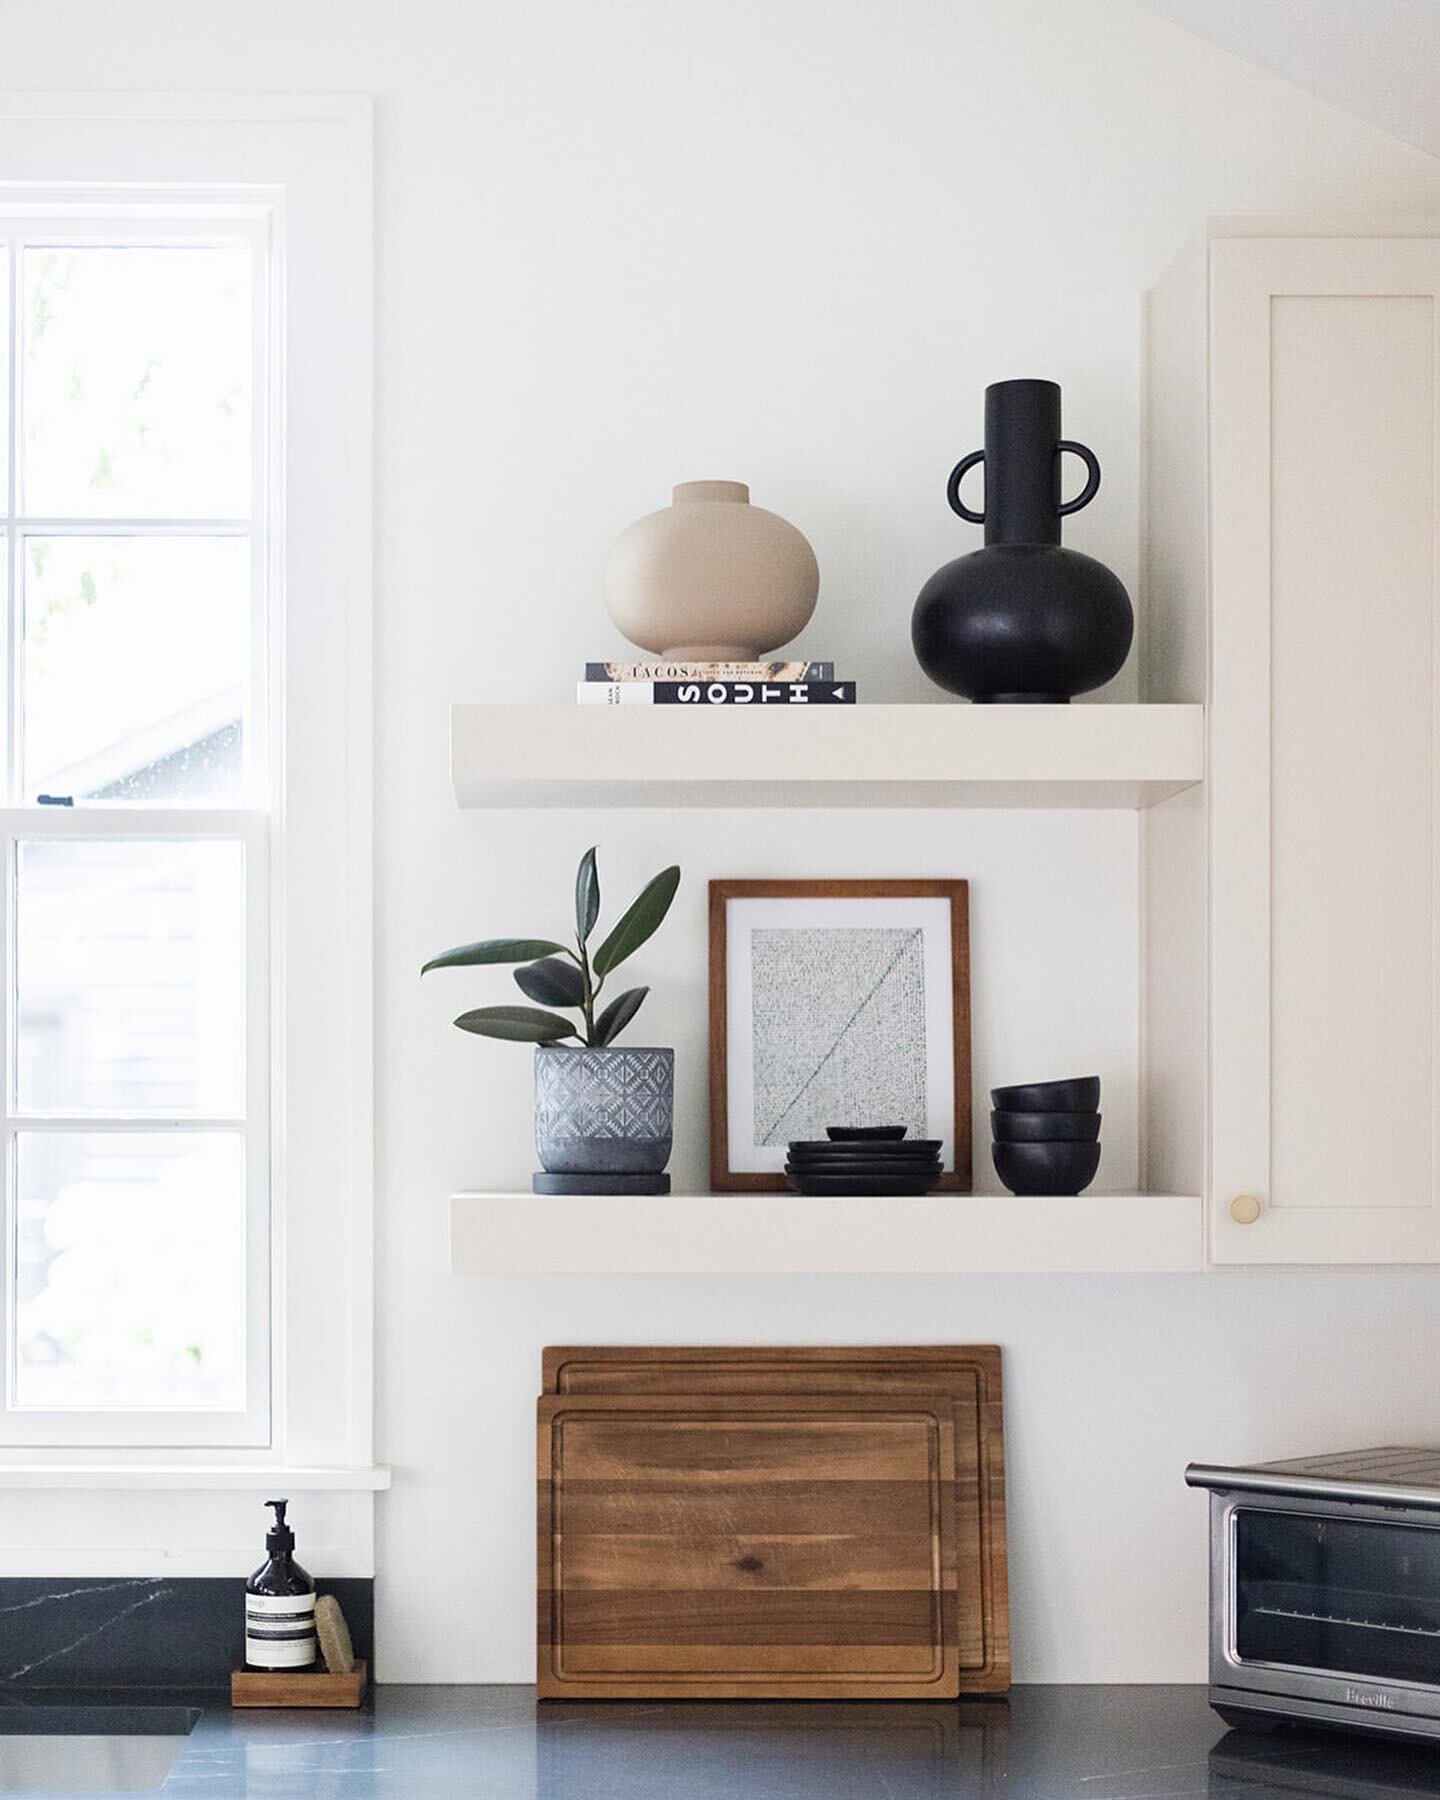 Shelves vs cabinets: the debate around the windows. Ultimately we wanted the space to feel open and inviting, stocked with practical items that are used daily.
.
.
.
📸: @nkengram 

#columbusohio #architecture #interiordesign #homedecor #interior #ki